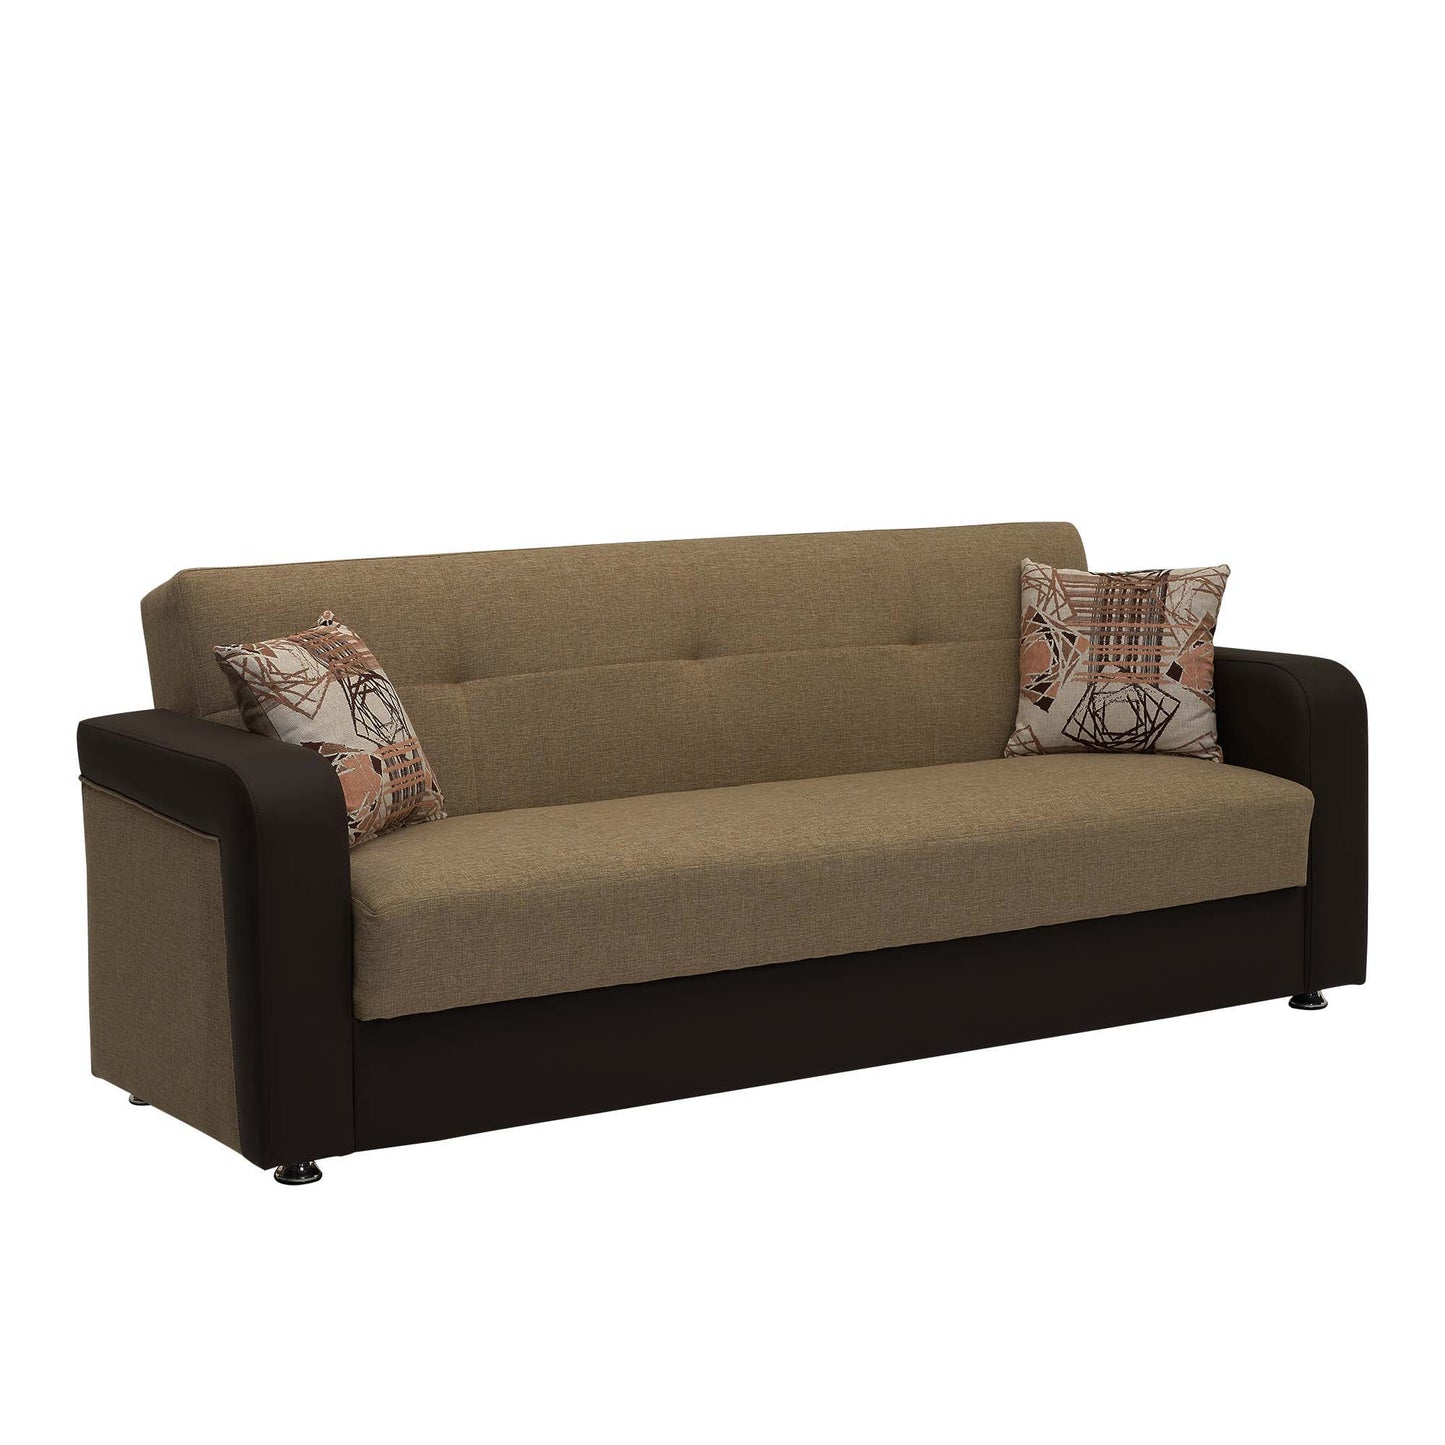 Ottomanson Harmony - Convertible Sofabed With Storage